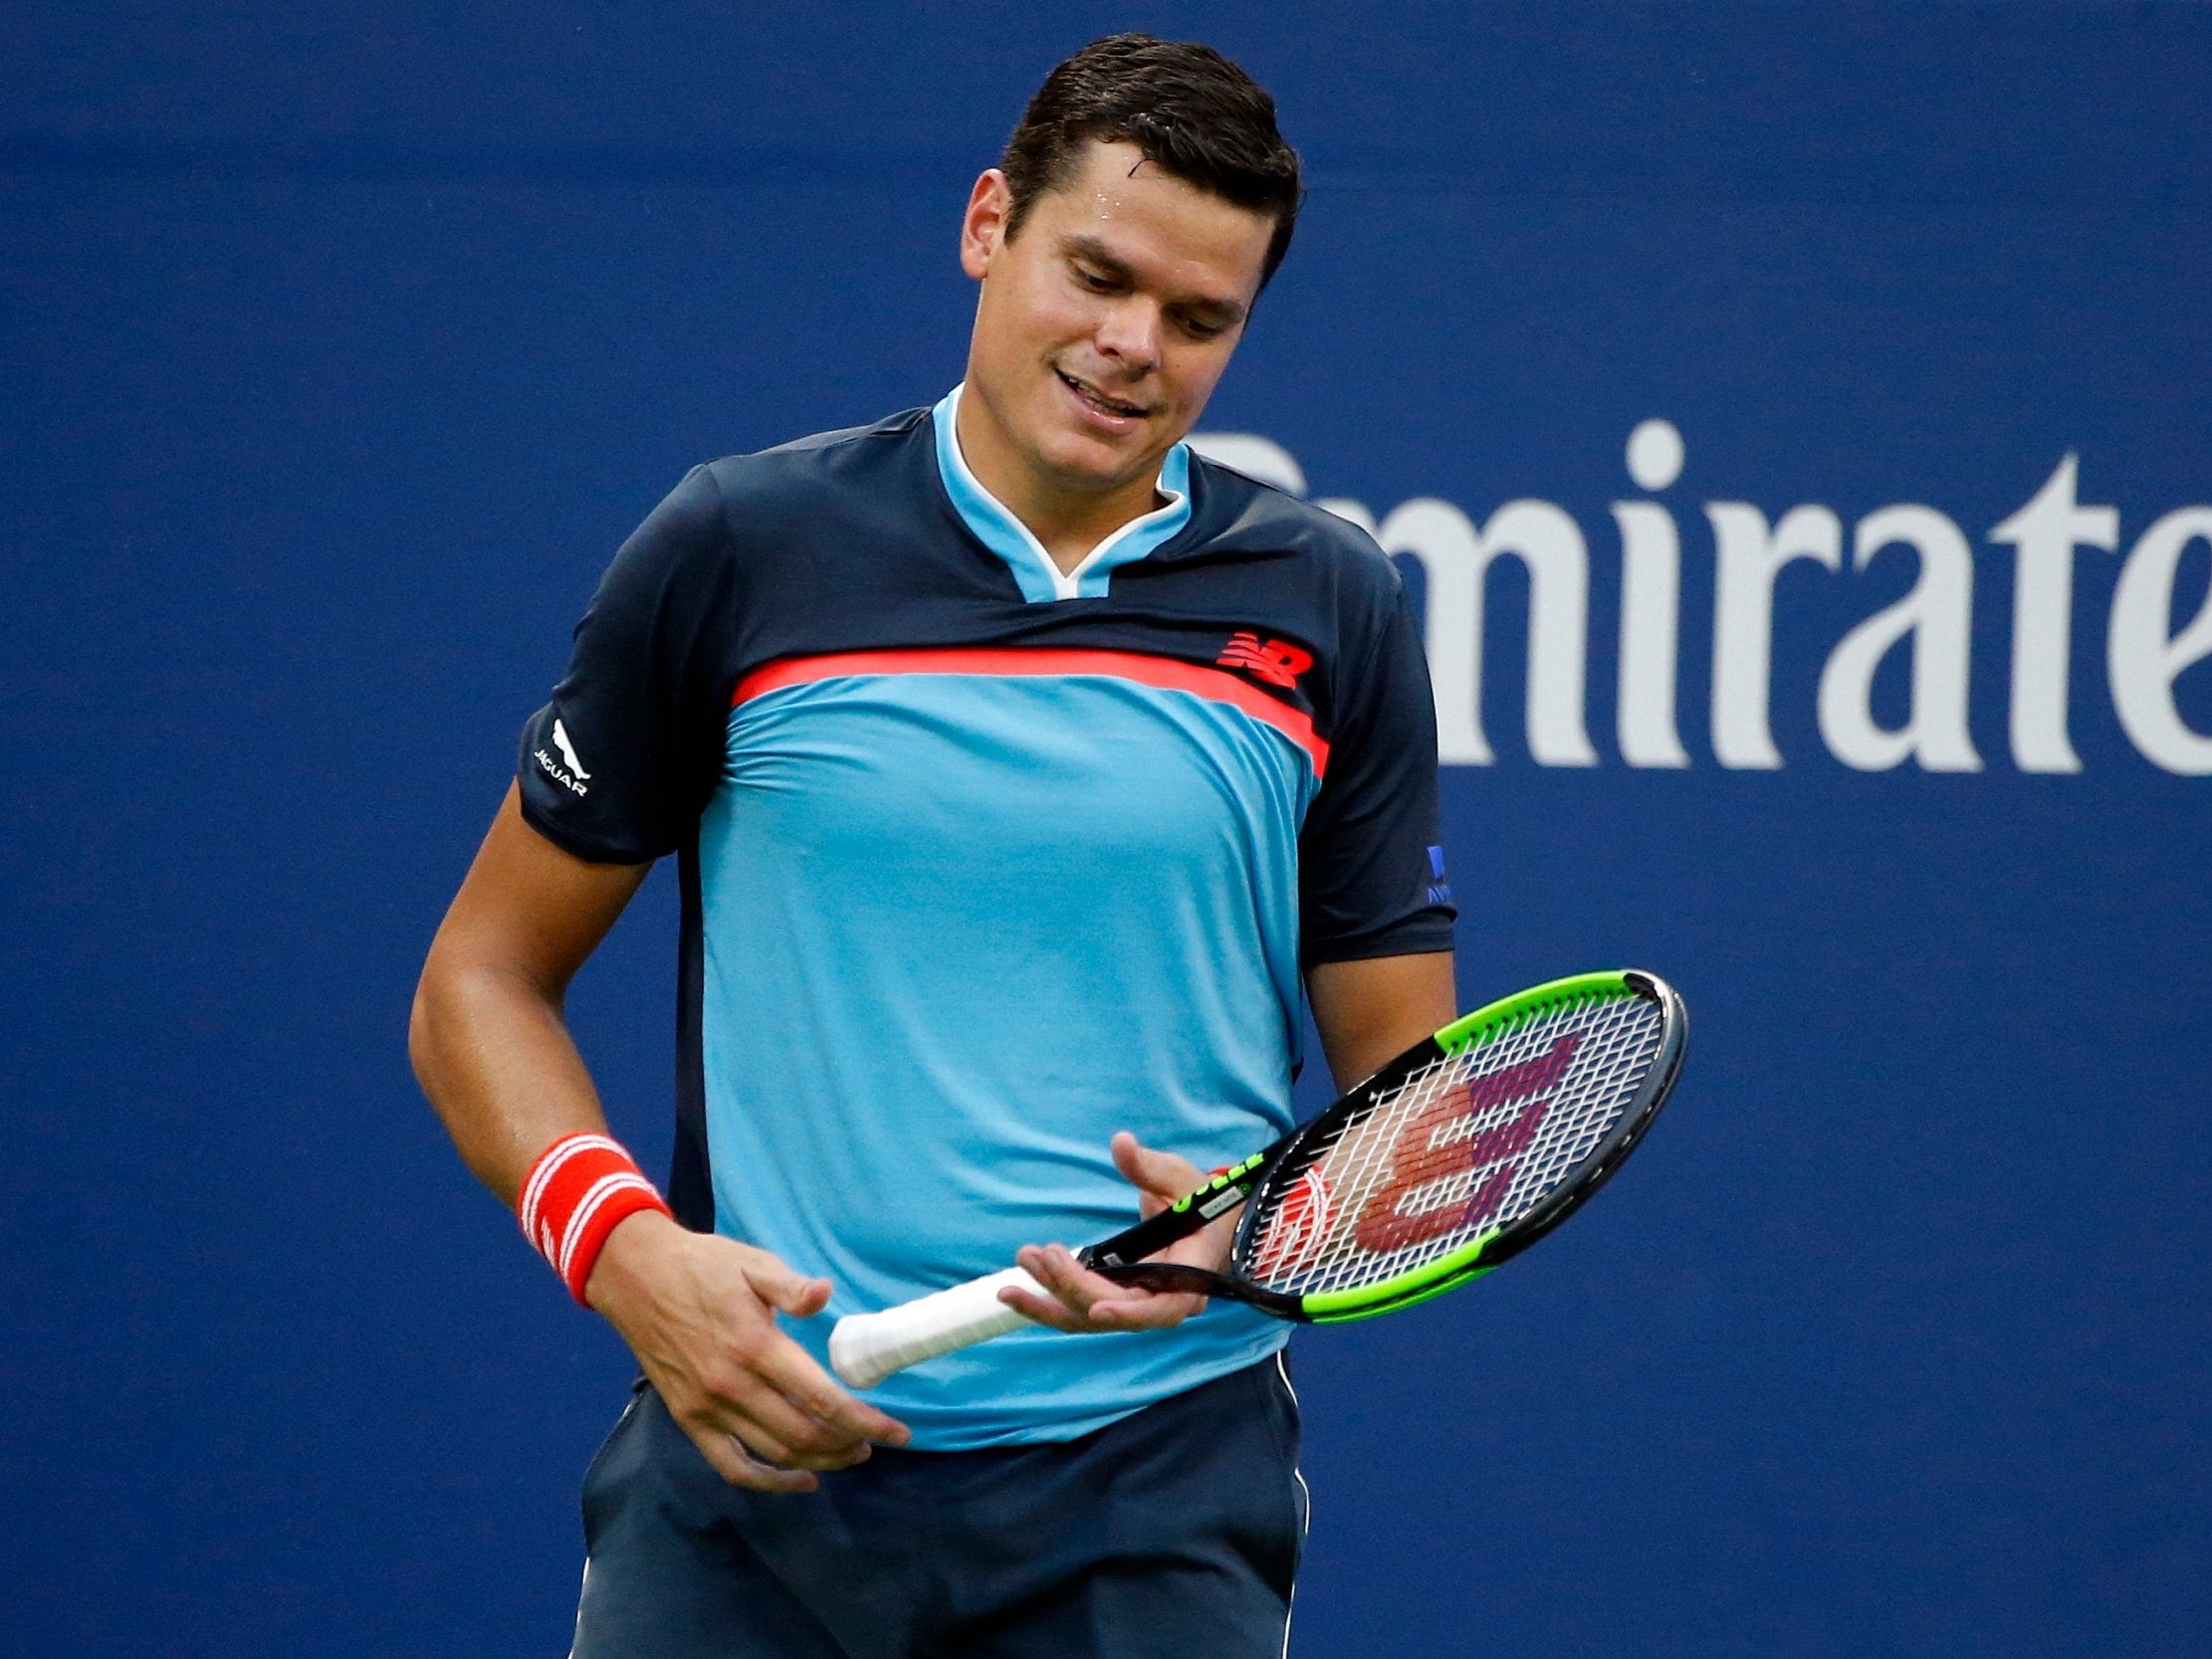 Milos Raonic suffered defeat against Isner in five sets